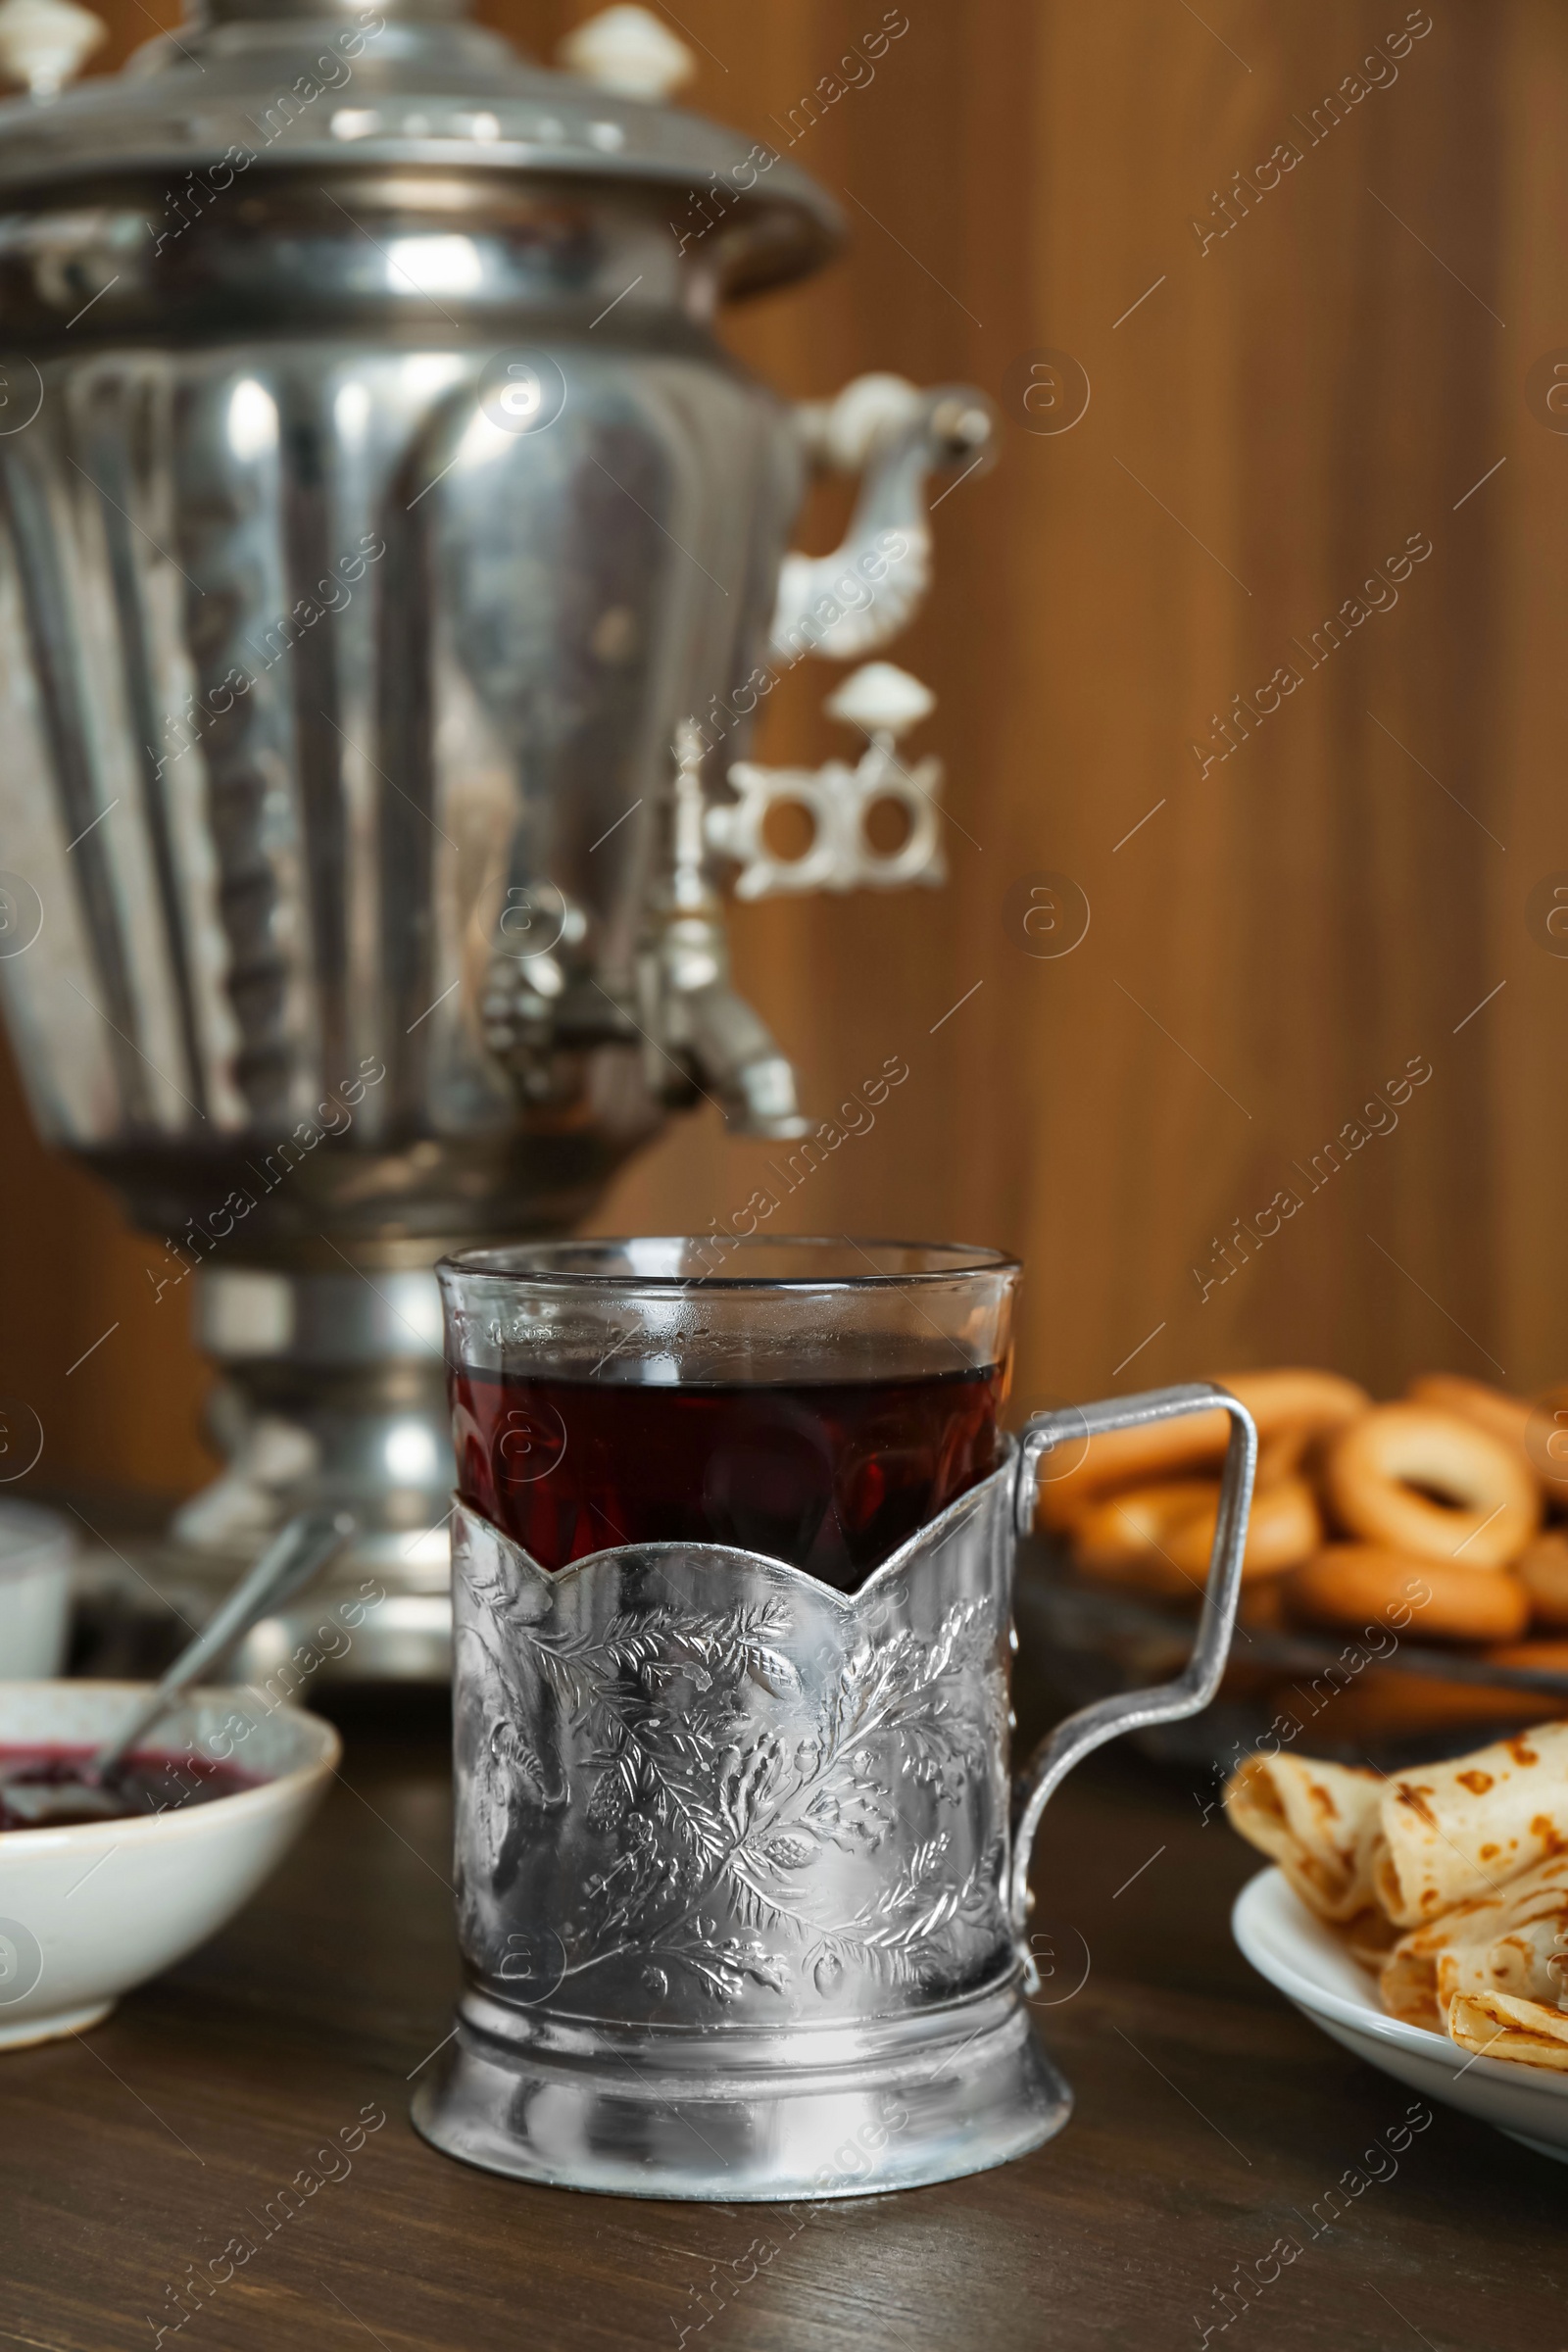 Photo of Vintage samovar, cup of hot drink and snacks served on wooden table. Traditional Russian tea ceremony